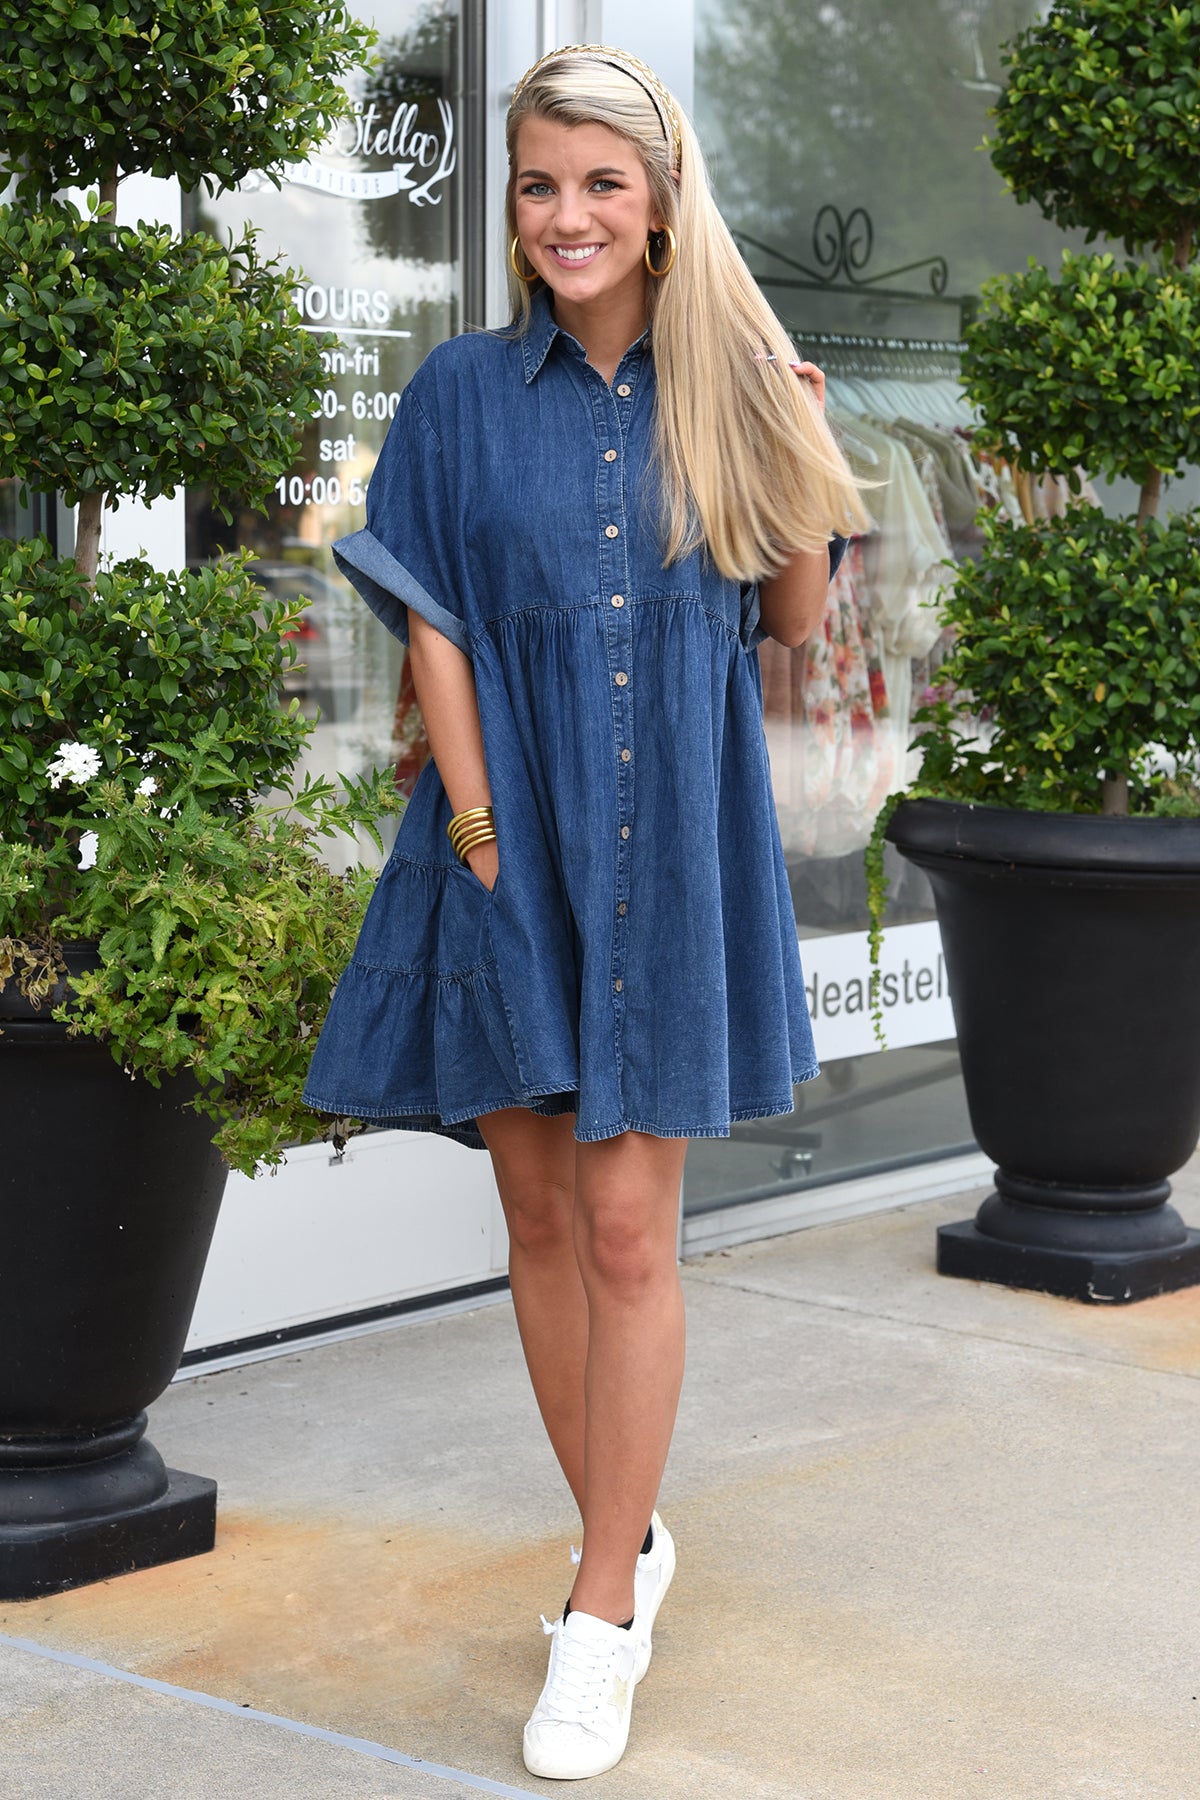 How To Style a Denim Dress For Winter As Well As A Tiered Dress